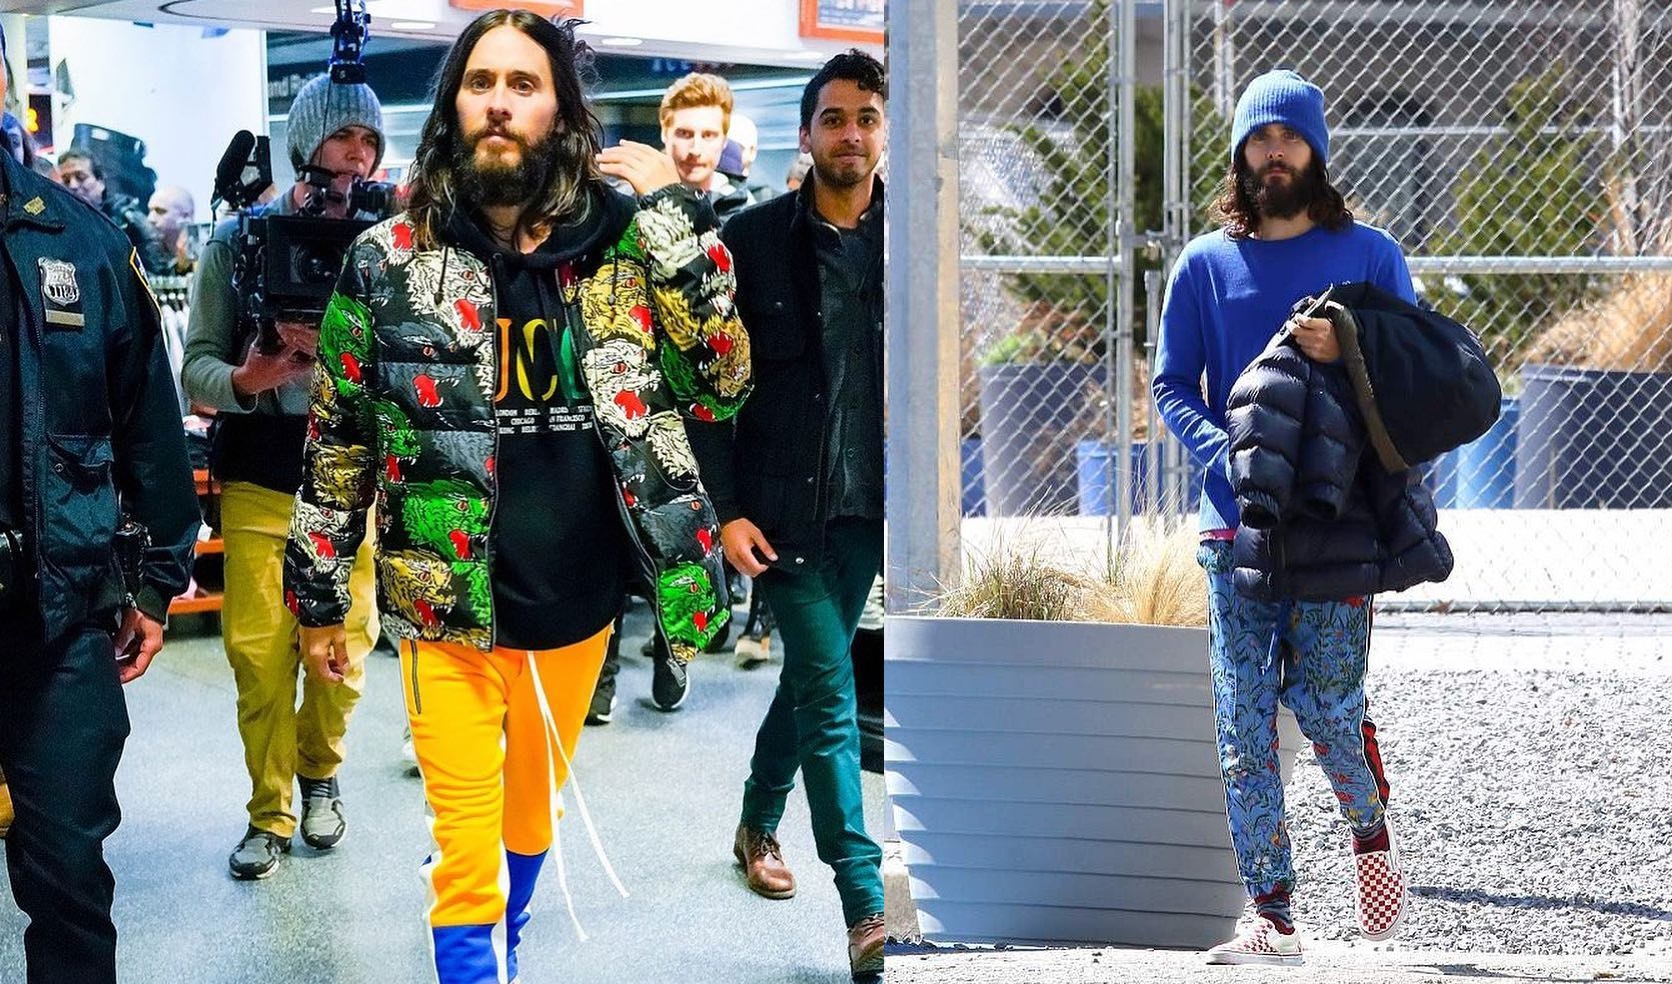 SPOTTED: Jared Leto in Gucci, Vans and Fear Of God